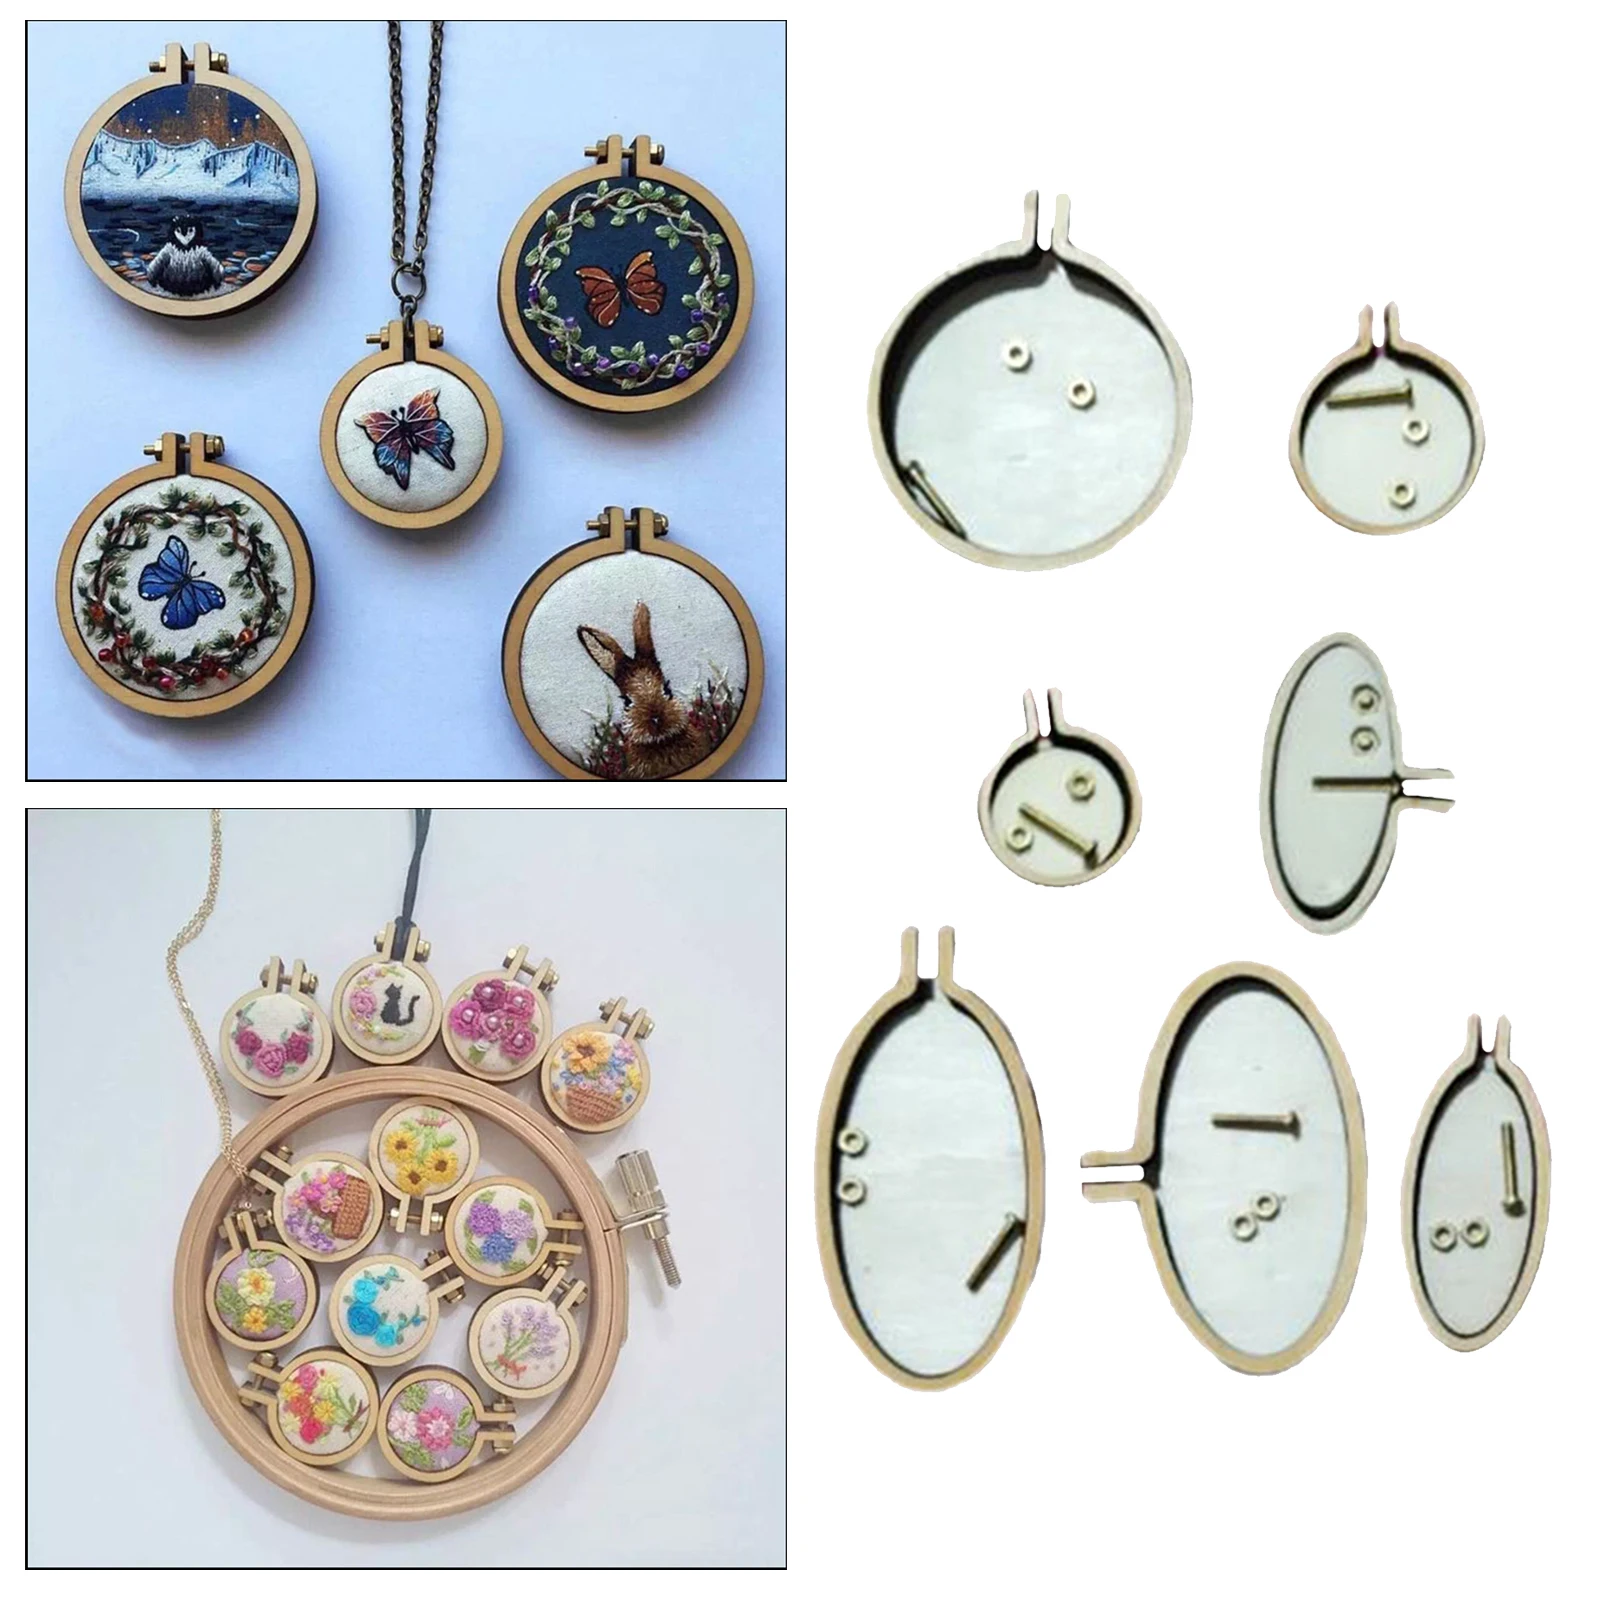 Wood Mini Embroidery Hoop DIY Handy Sewing Pendant Cross Stitch Necklace